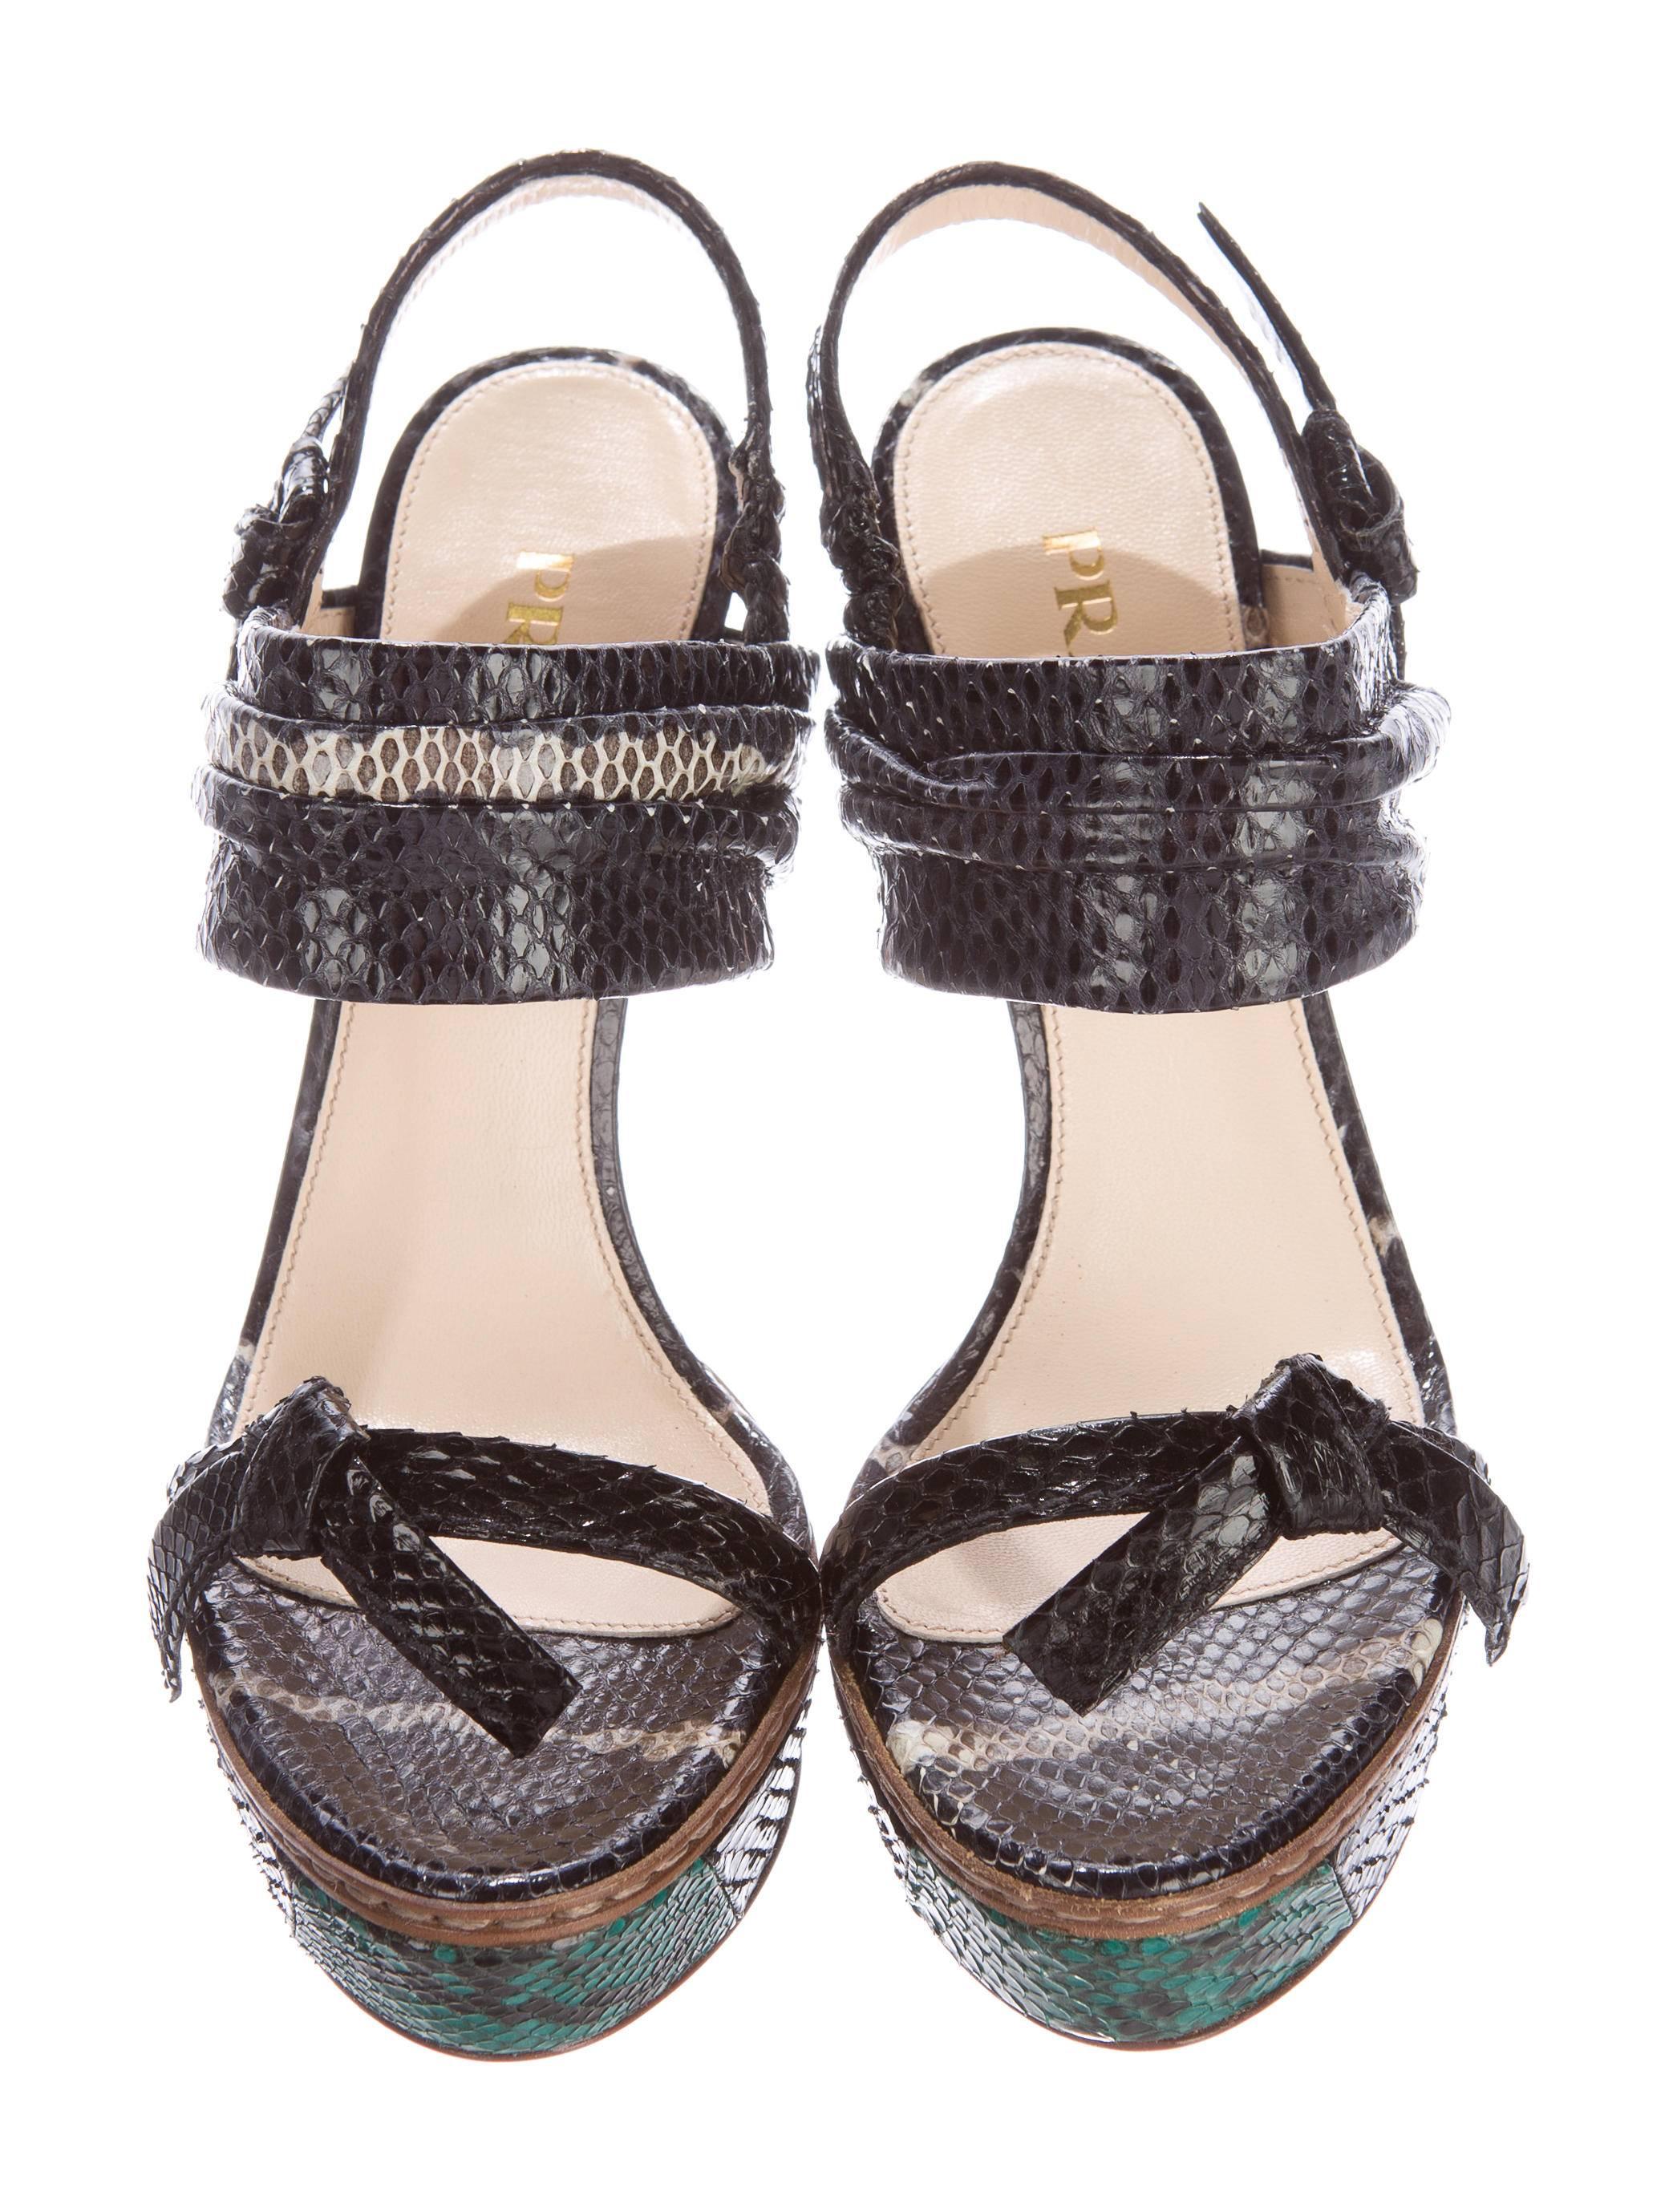 CURATOR'S NOTES

Prada NEW & SOLD OUT Black Snake Leather Twist Knot Block Sandals Heels in Box 

Size IT 36
Snakeskin leather
Slingback closure
Made in Italy
Heel height 5.25"
Includes original Prada dust bag and box 